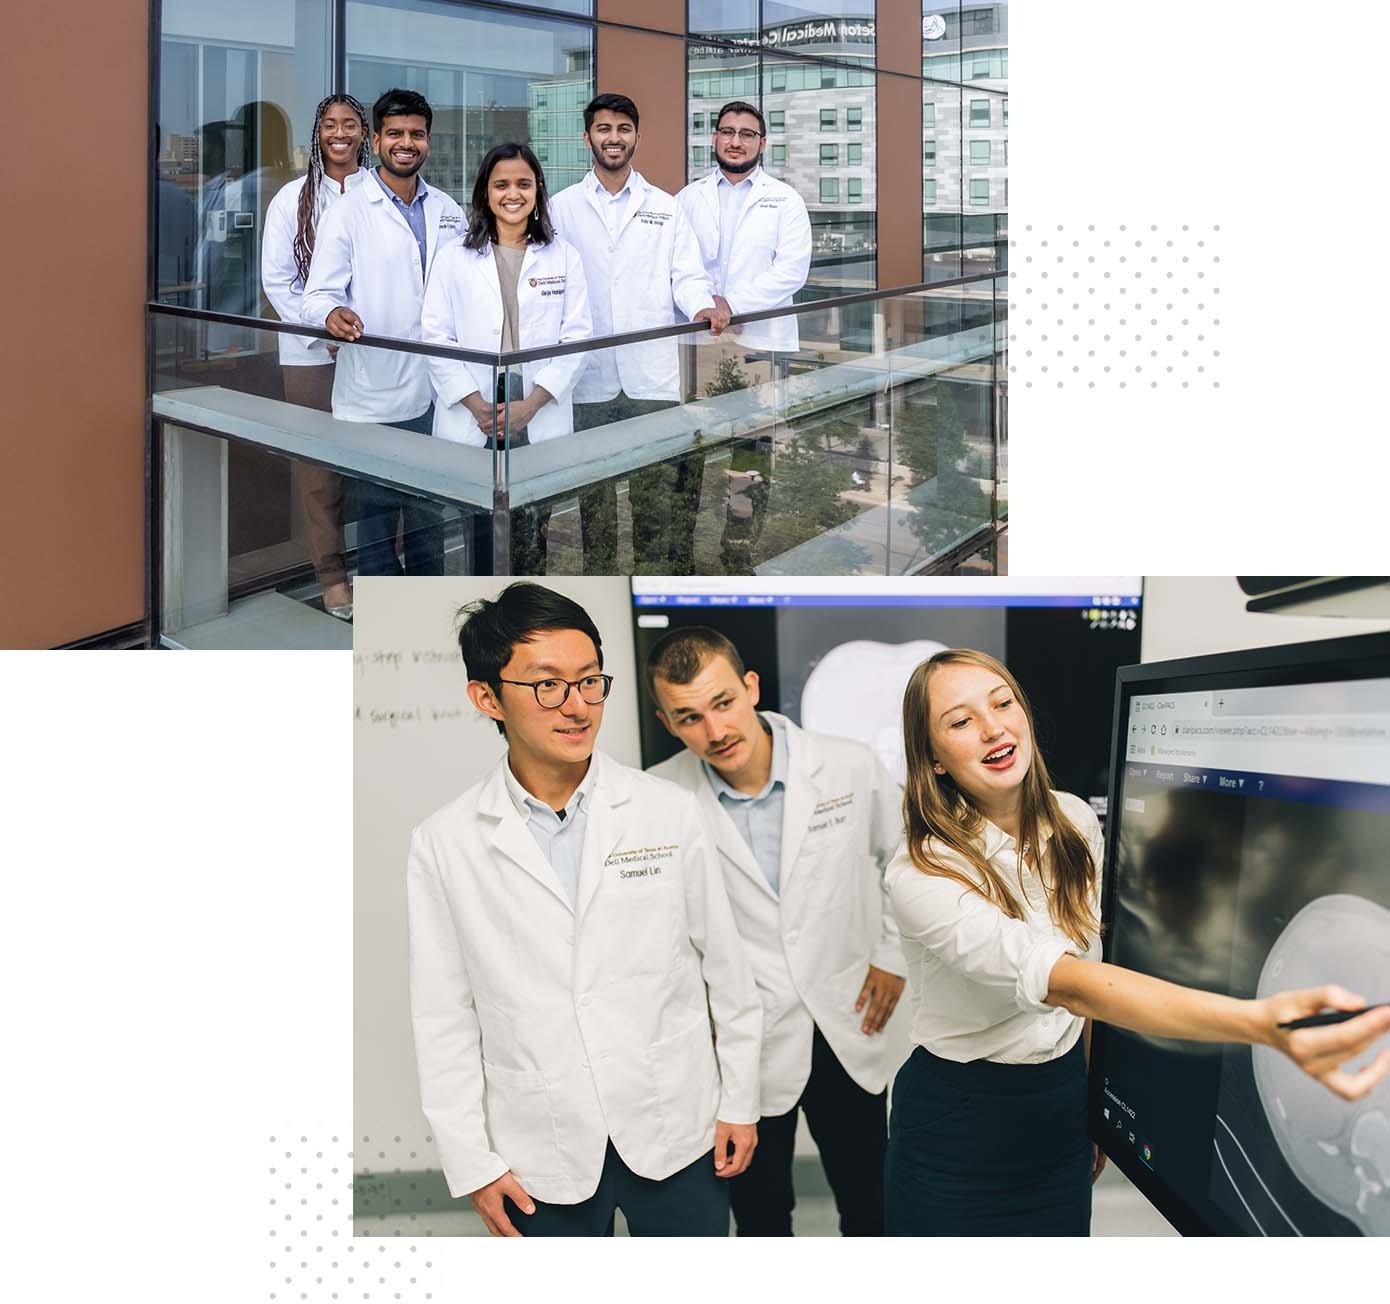 Two separate photos collaged together. In one, a group of medical students, all wearing white coats, stand for a portrait on a balcony of the Dell Med campus. In the other, medical students gather around and interact with a monitor that has medical imaging displayed.